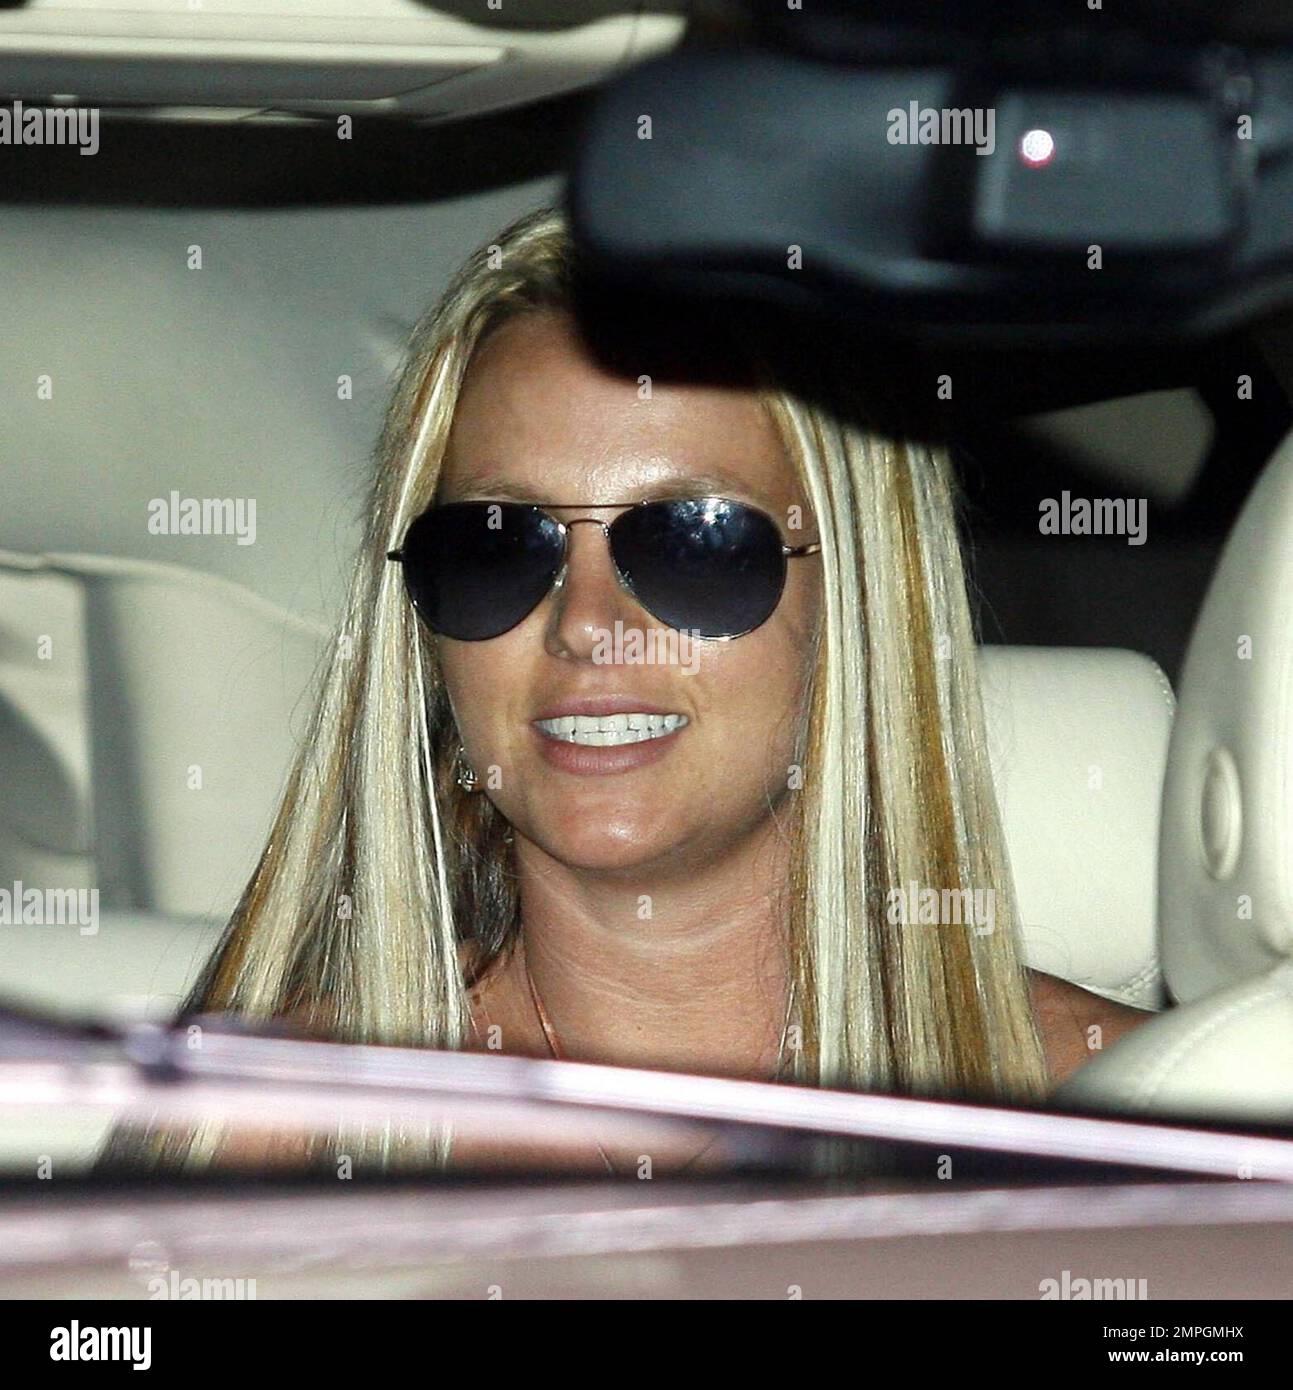 Britney Spears went to the B2V hair salon today and emerged a few hours  later with a sleek new mane of blonde hair with various tinted stripes in  it. West Hollywood, Ca.